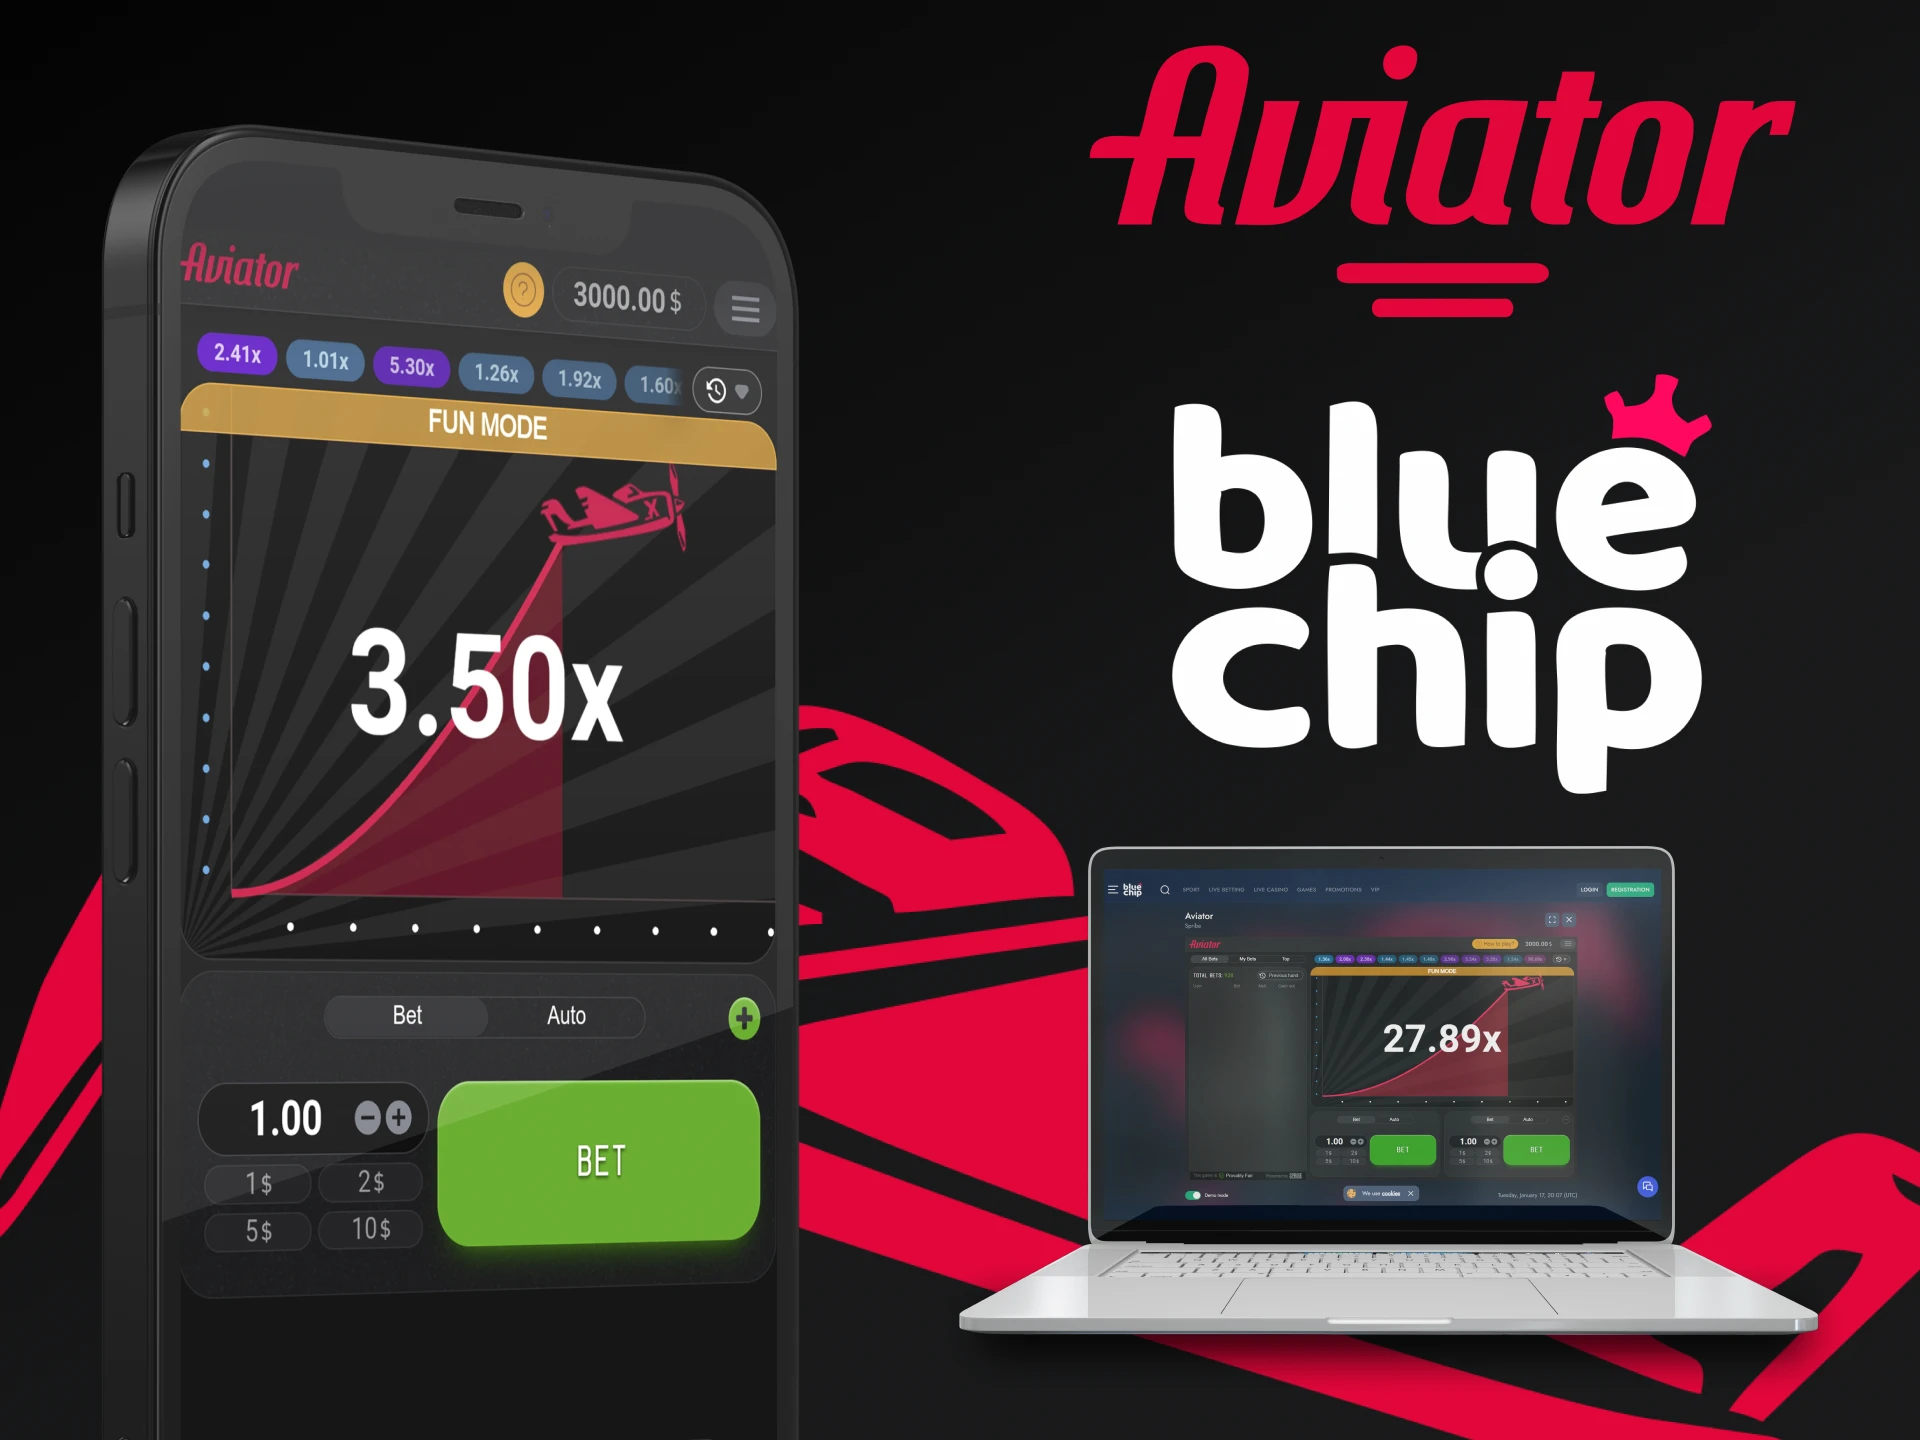 You can also play Aviator by Bluechip through your smartphone.